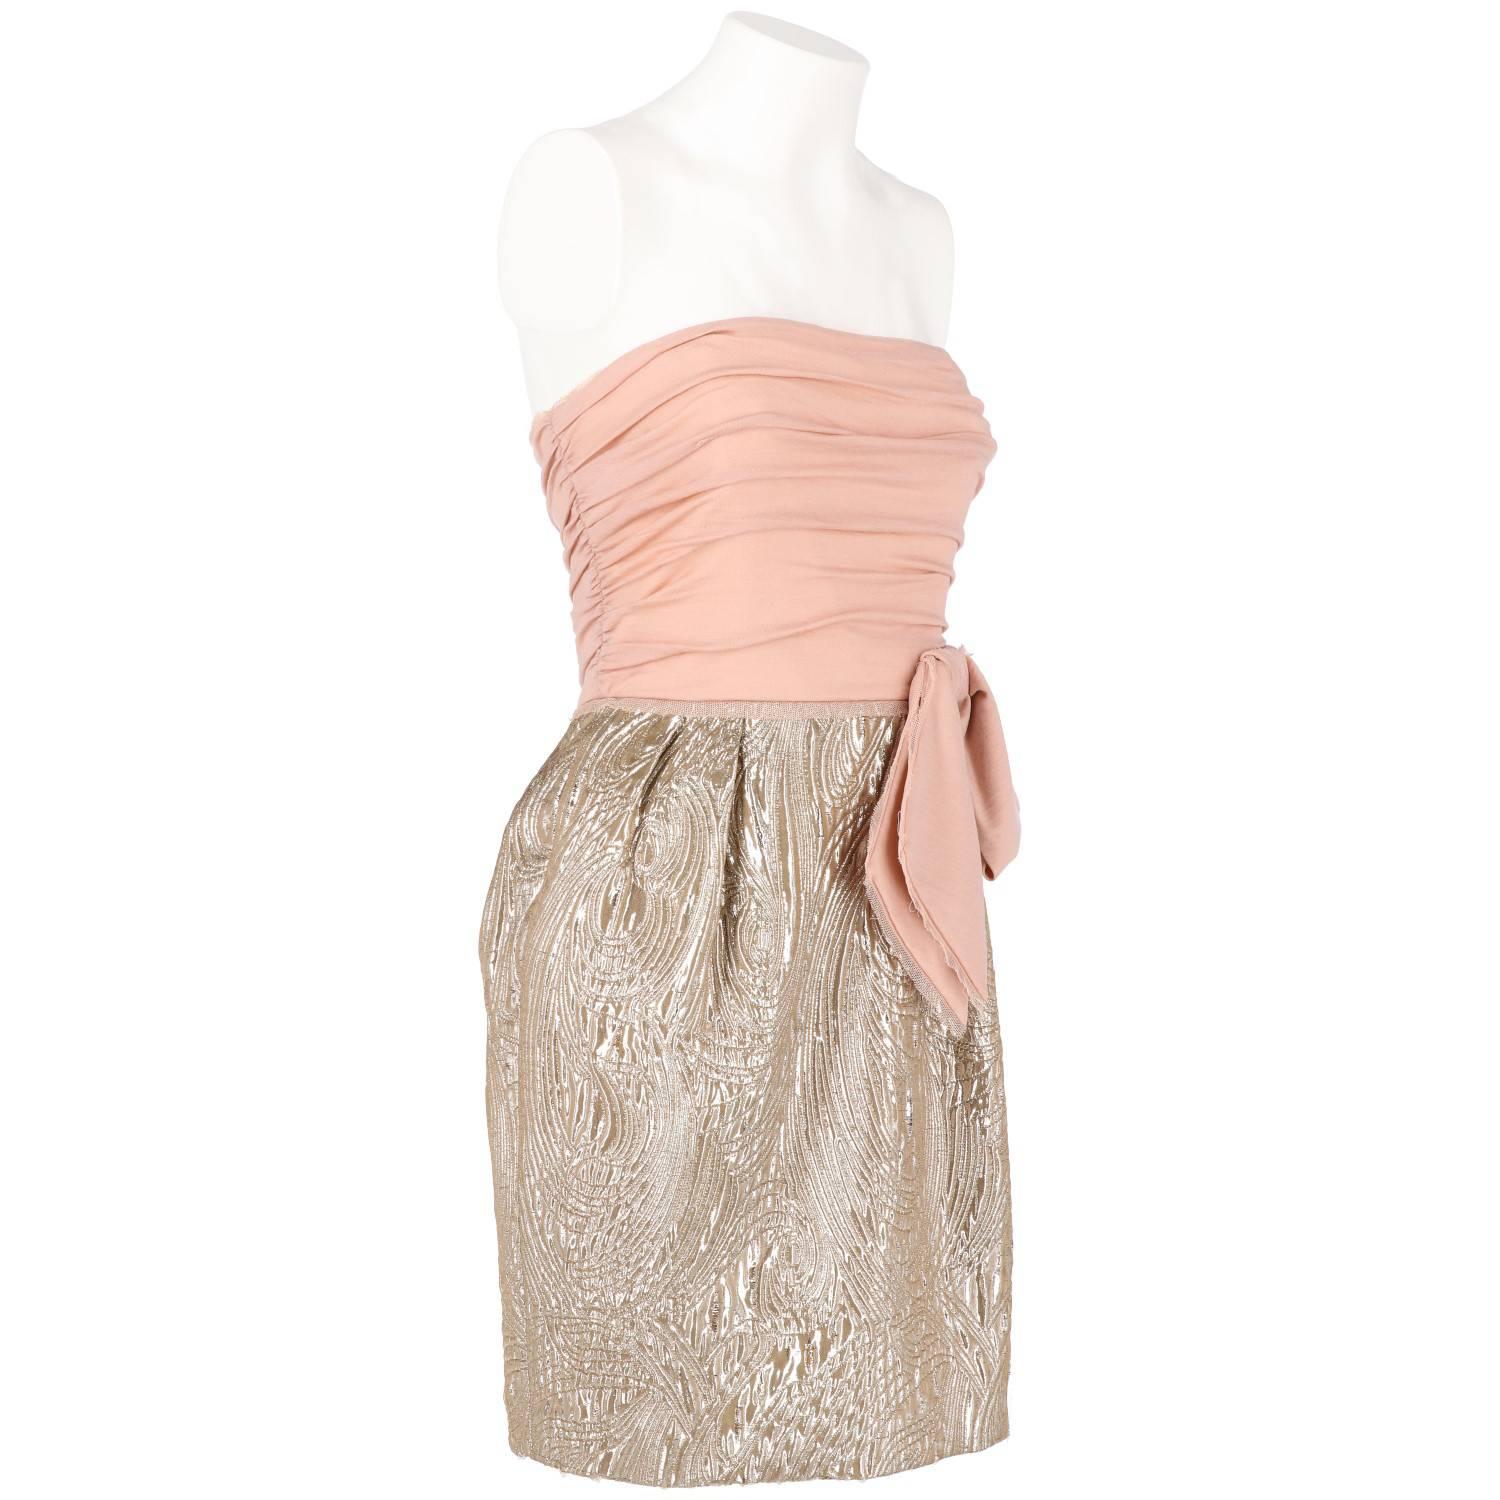 Elegant short vintage dress by Emilio Pucci. It features a pink sleeveless draped top with a large asymmetrical bow on the waist, and a ballon skirt in silver brocade lamé fabric. Lateral zip closure. The item is vintage, it was produced in the